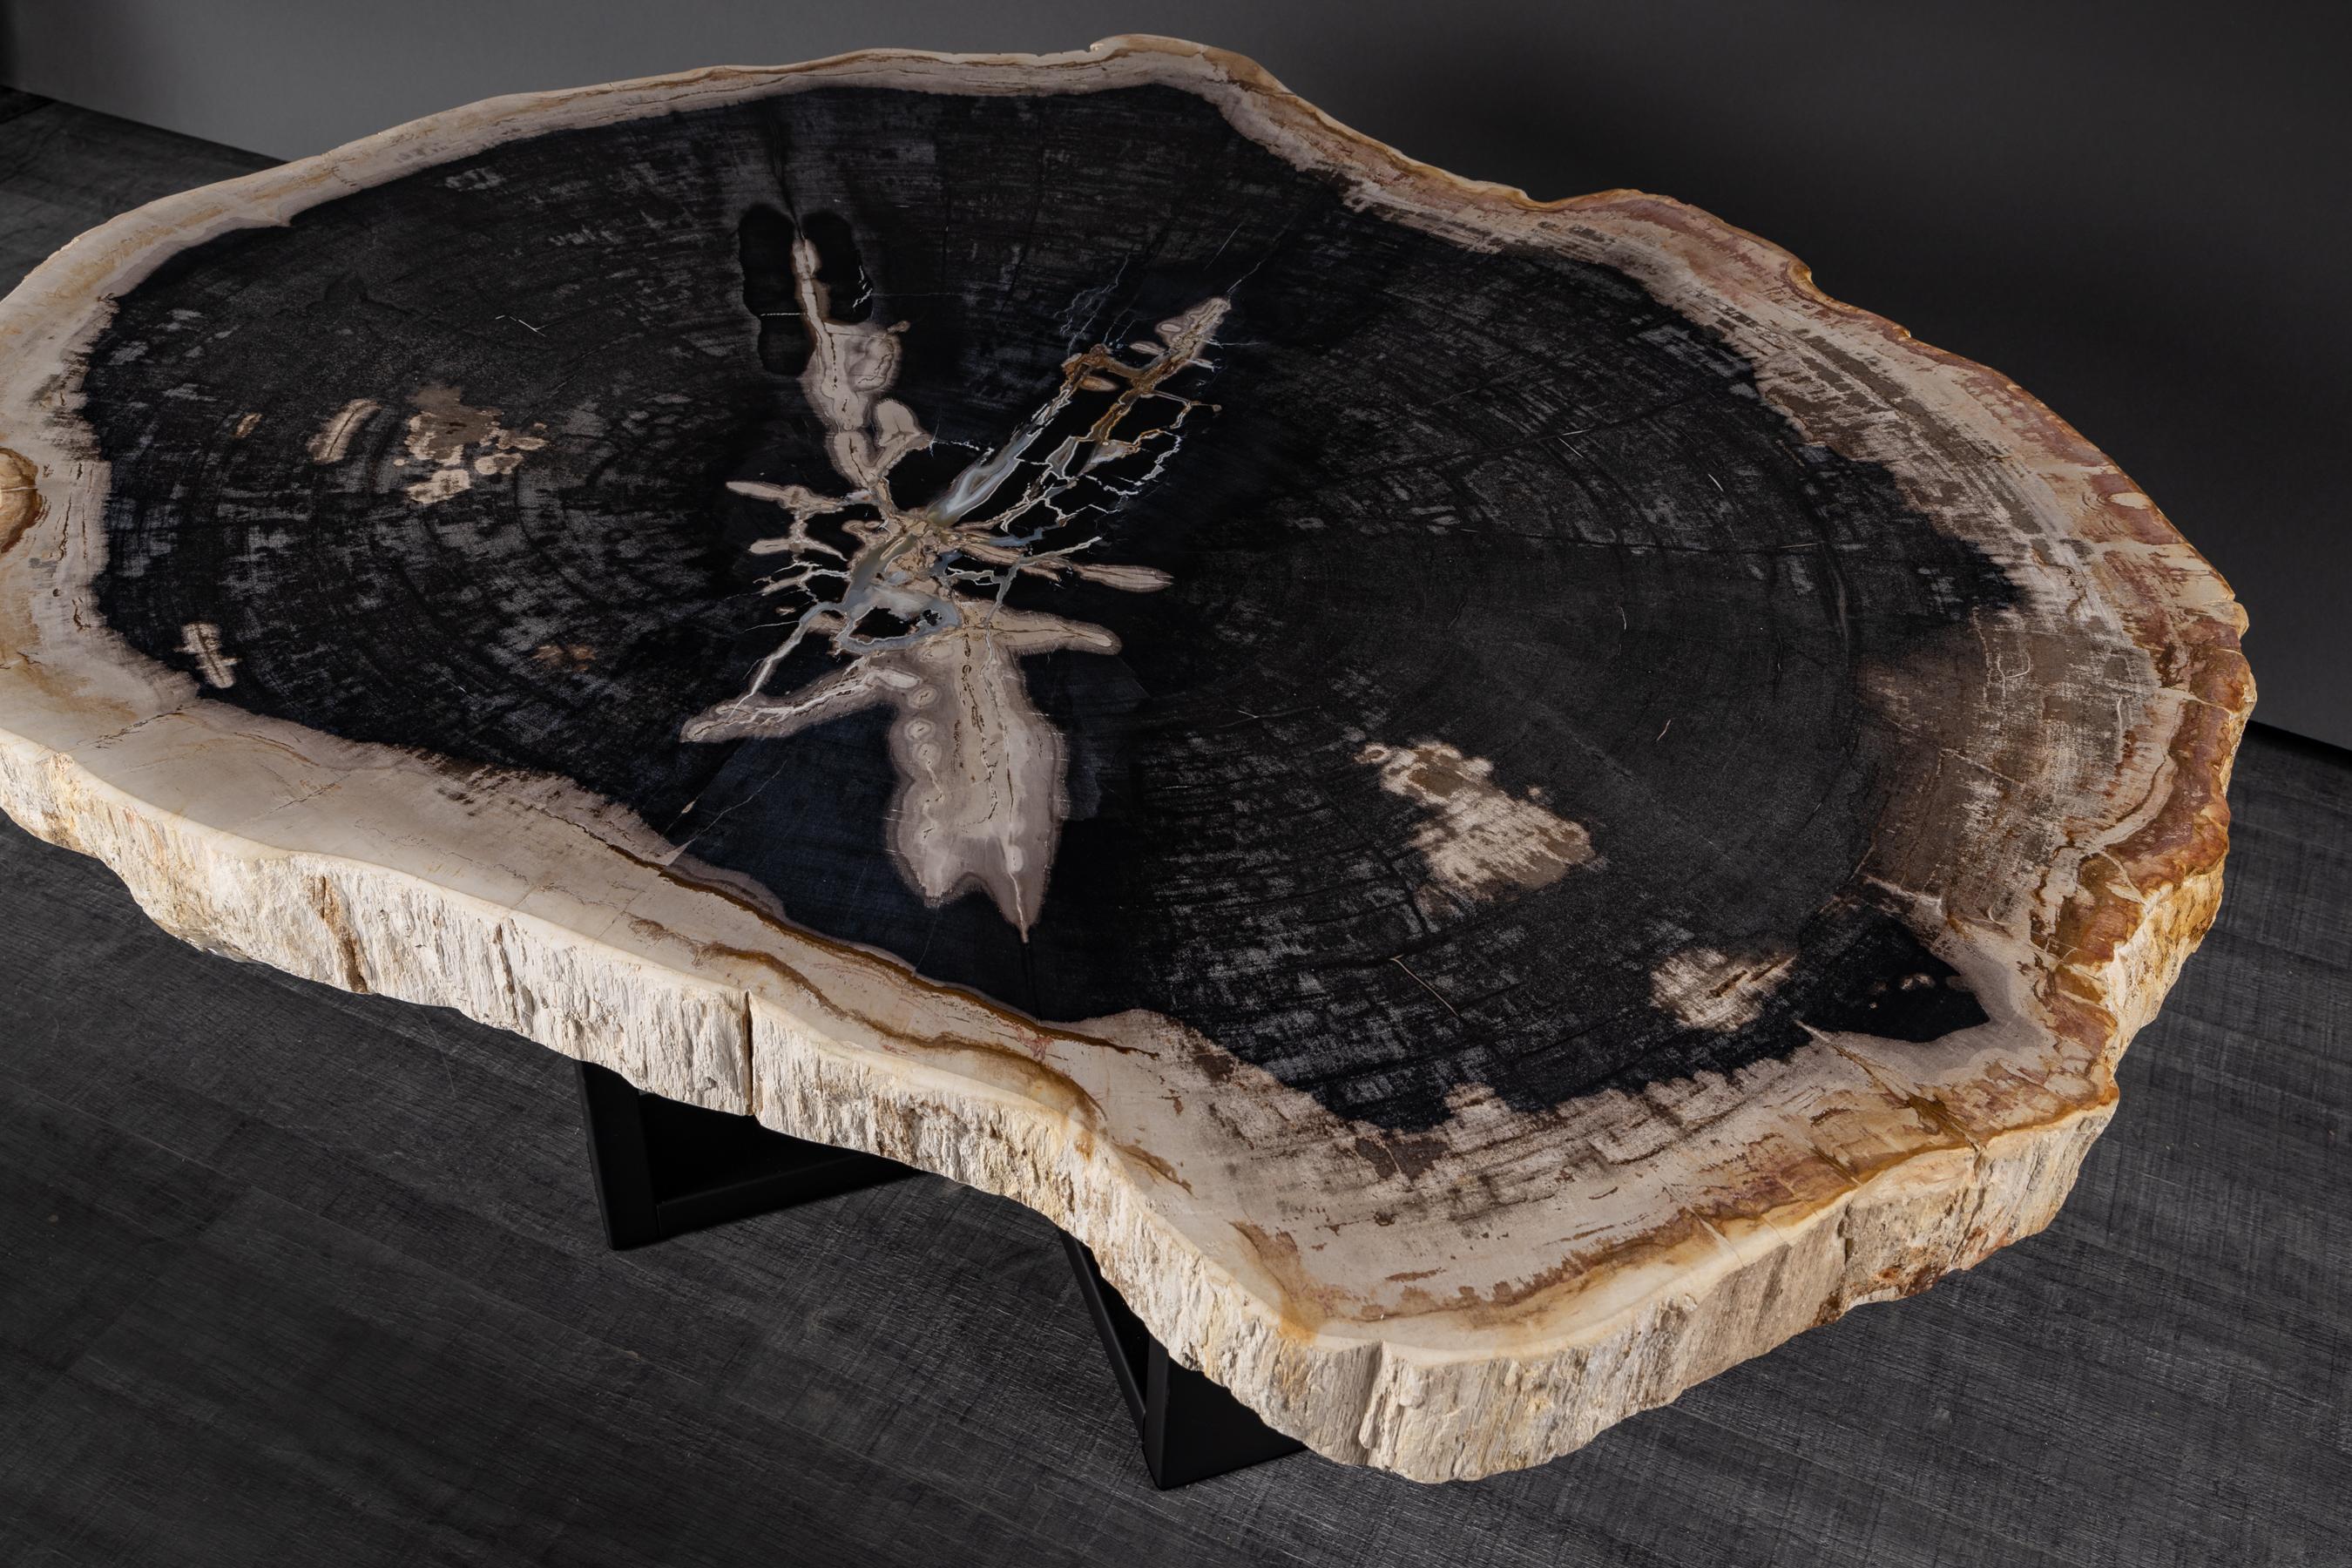 Contemporary Center or Coffee Table, Natural Circular Shape, Petrified Wood with Metal Base